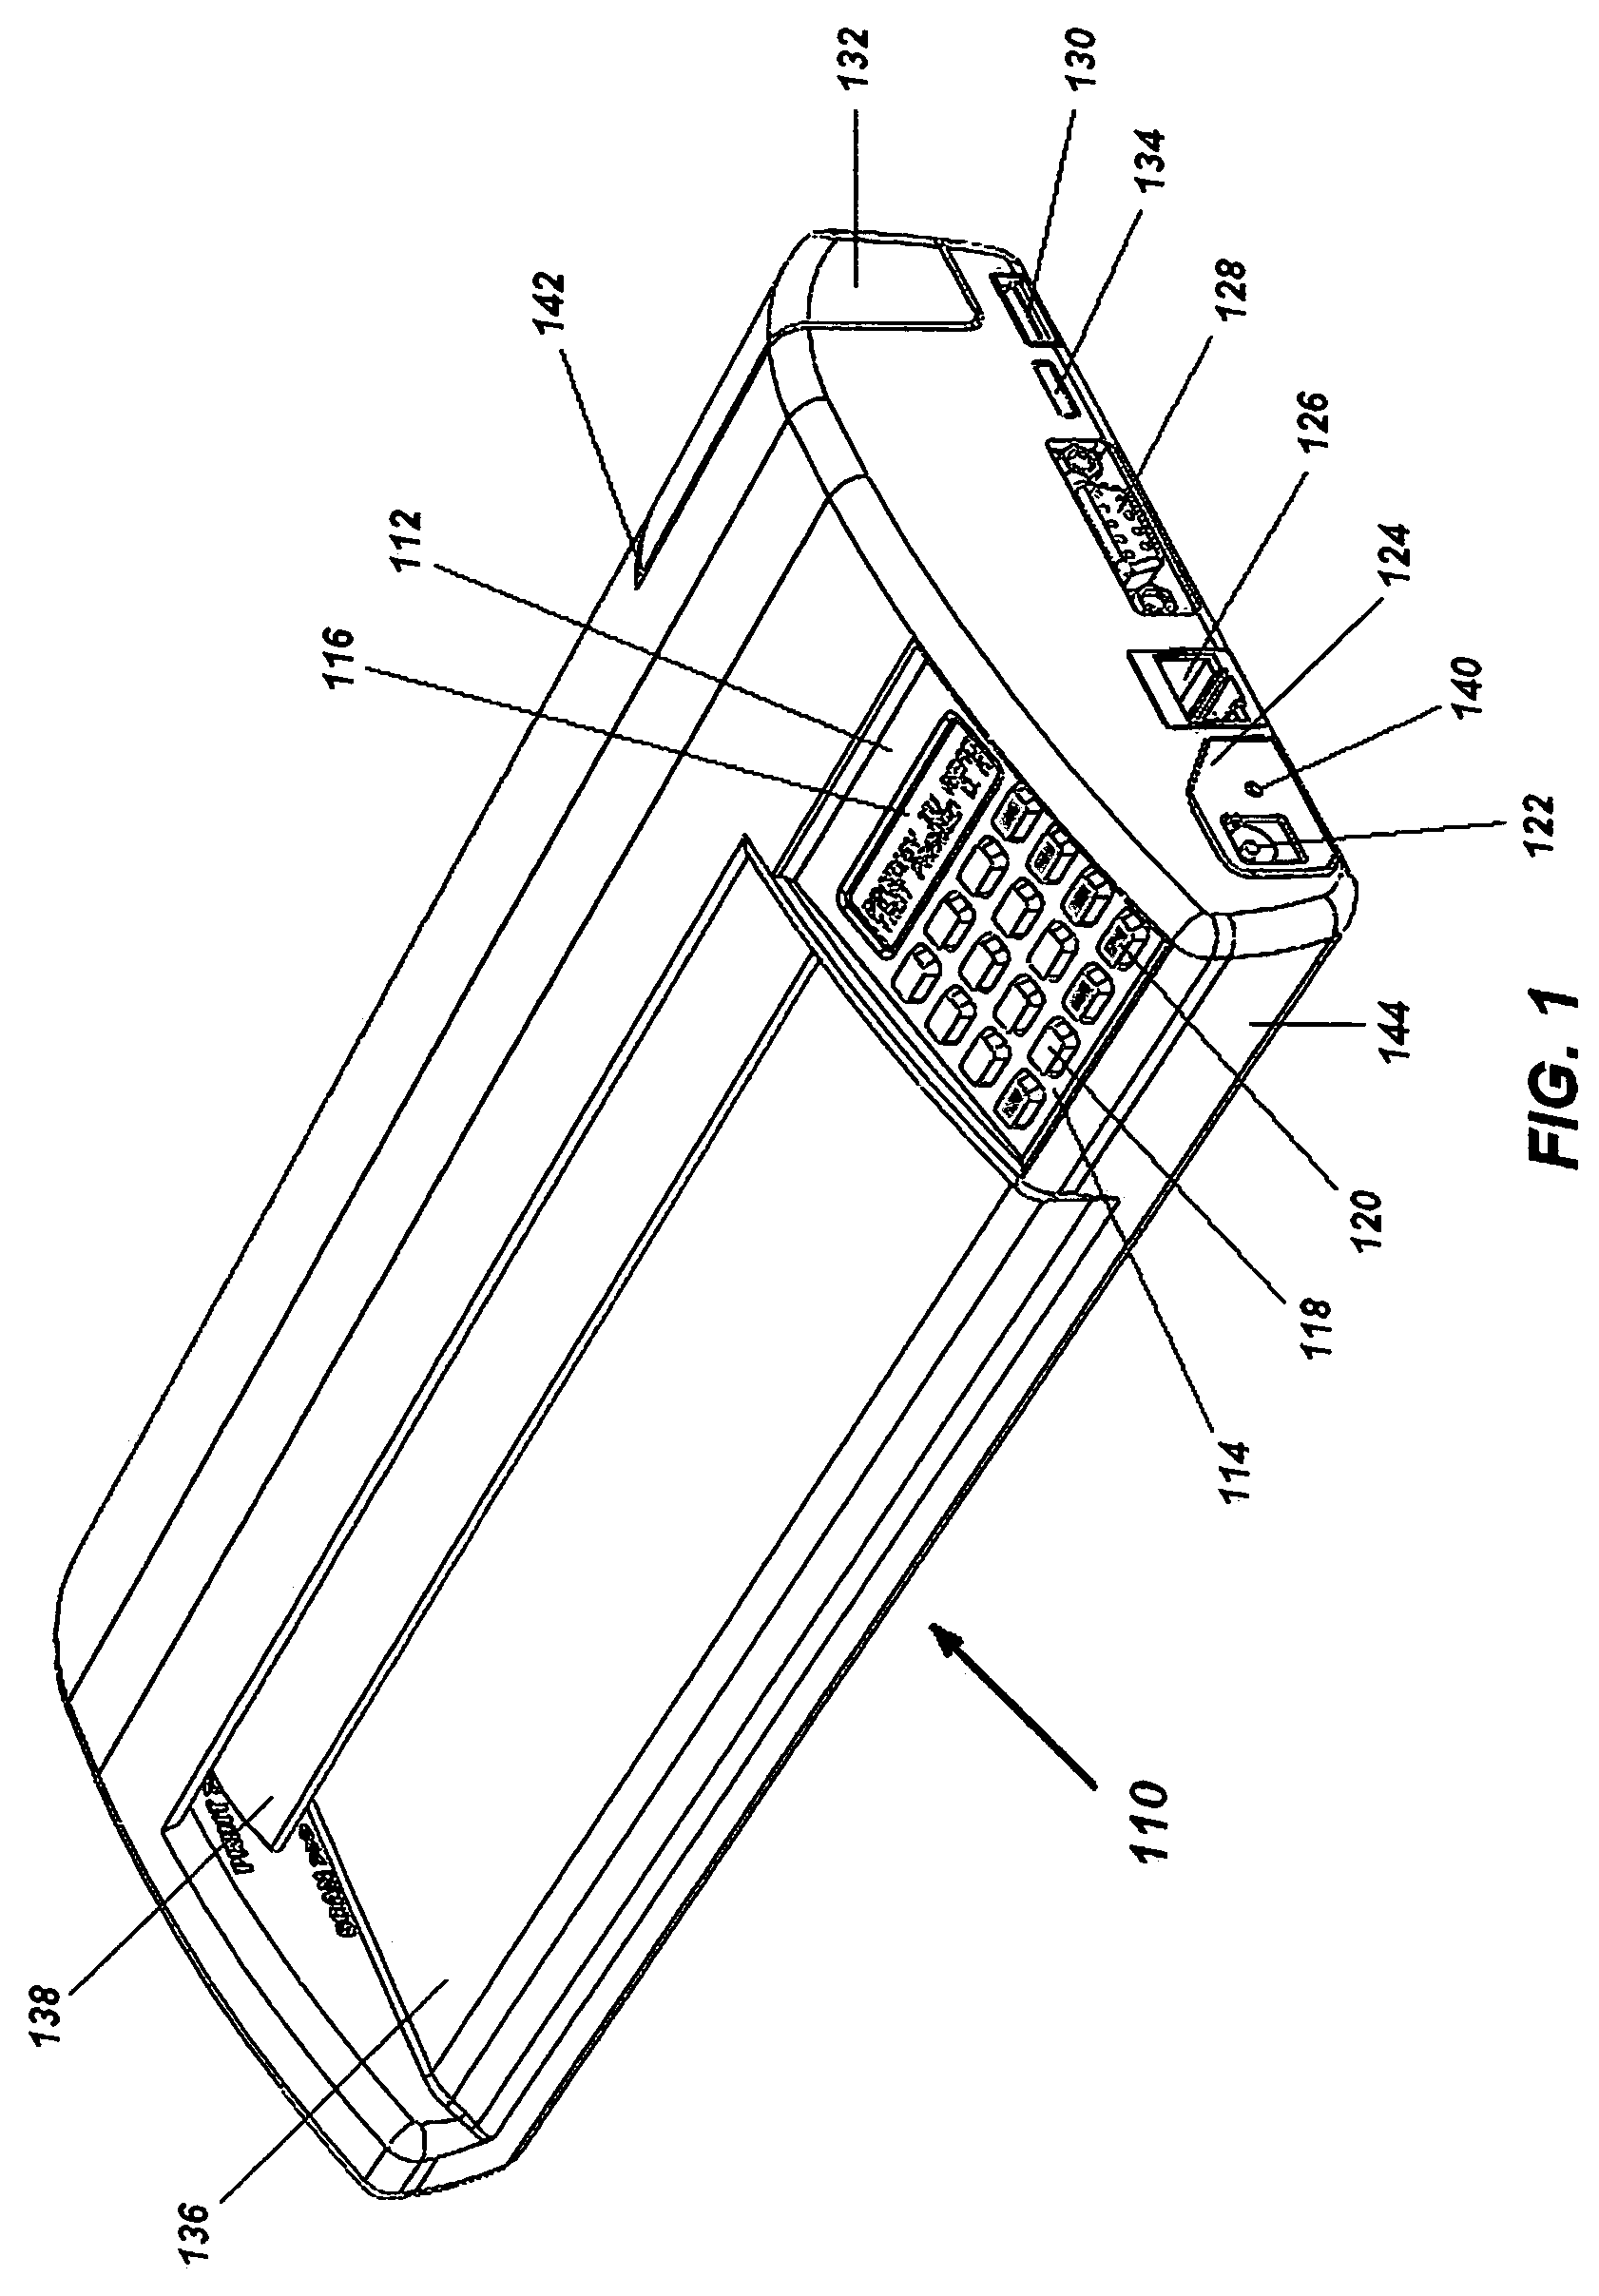 Portable electronic faxing, scanning, copying, and printing device